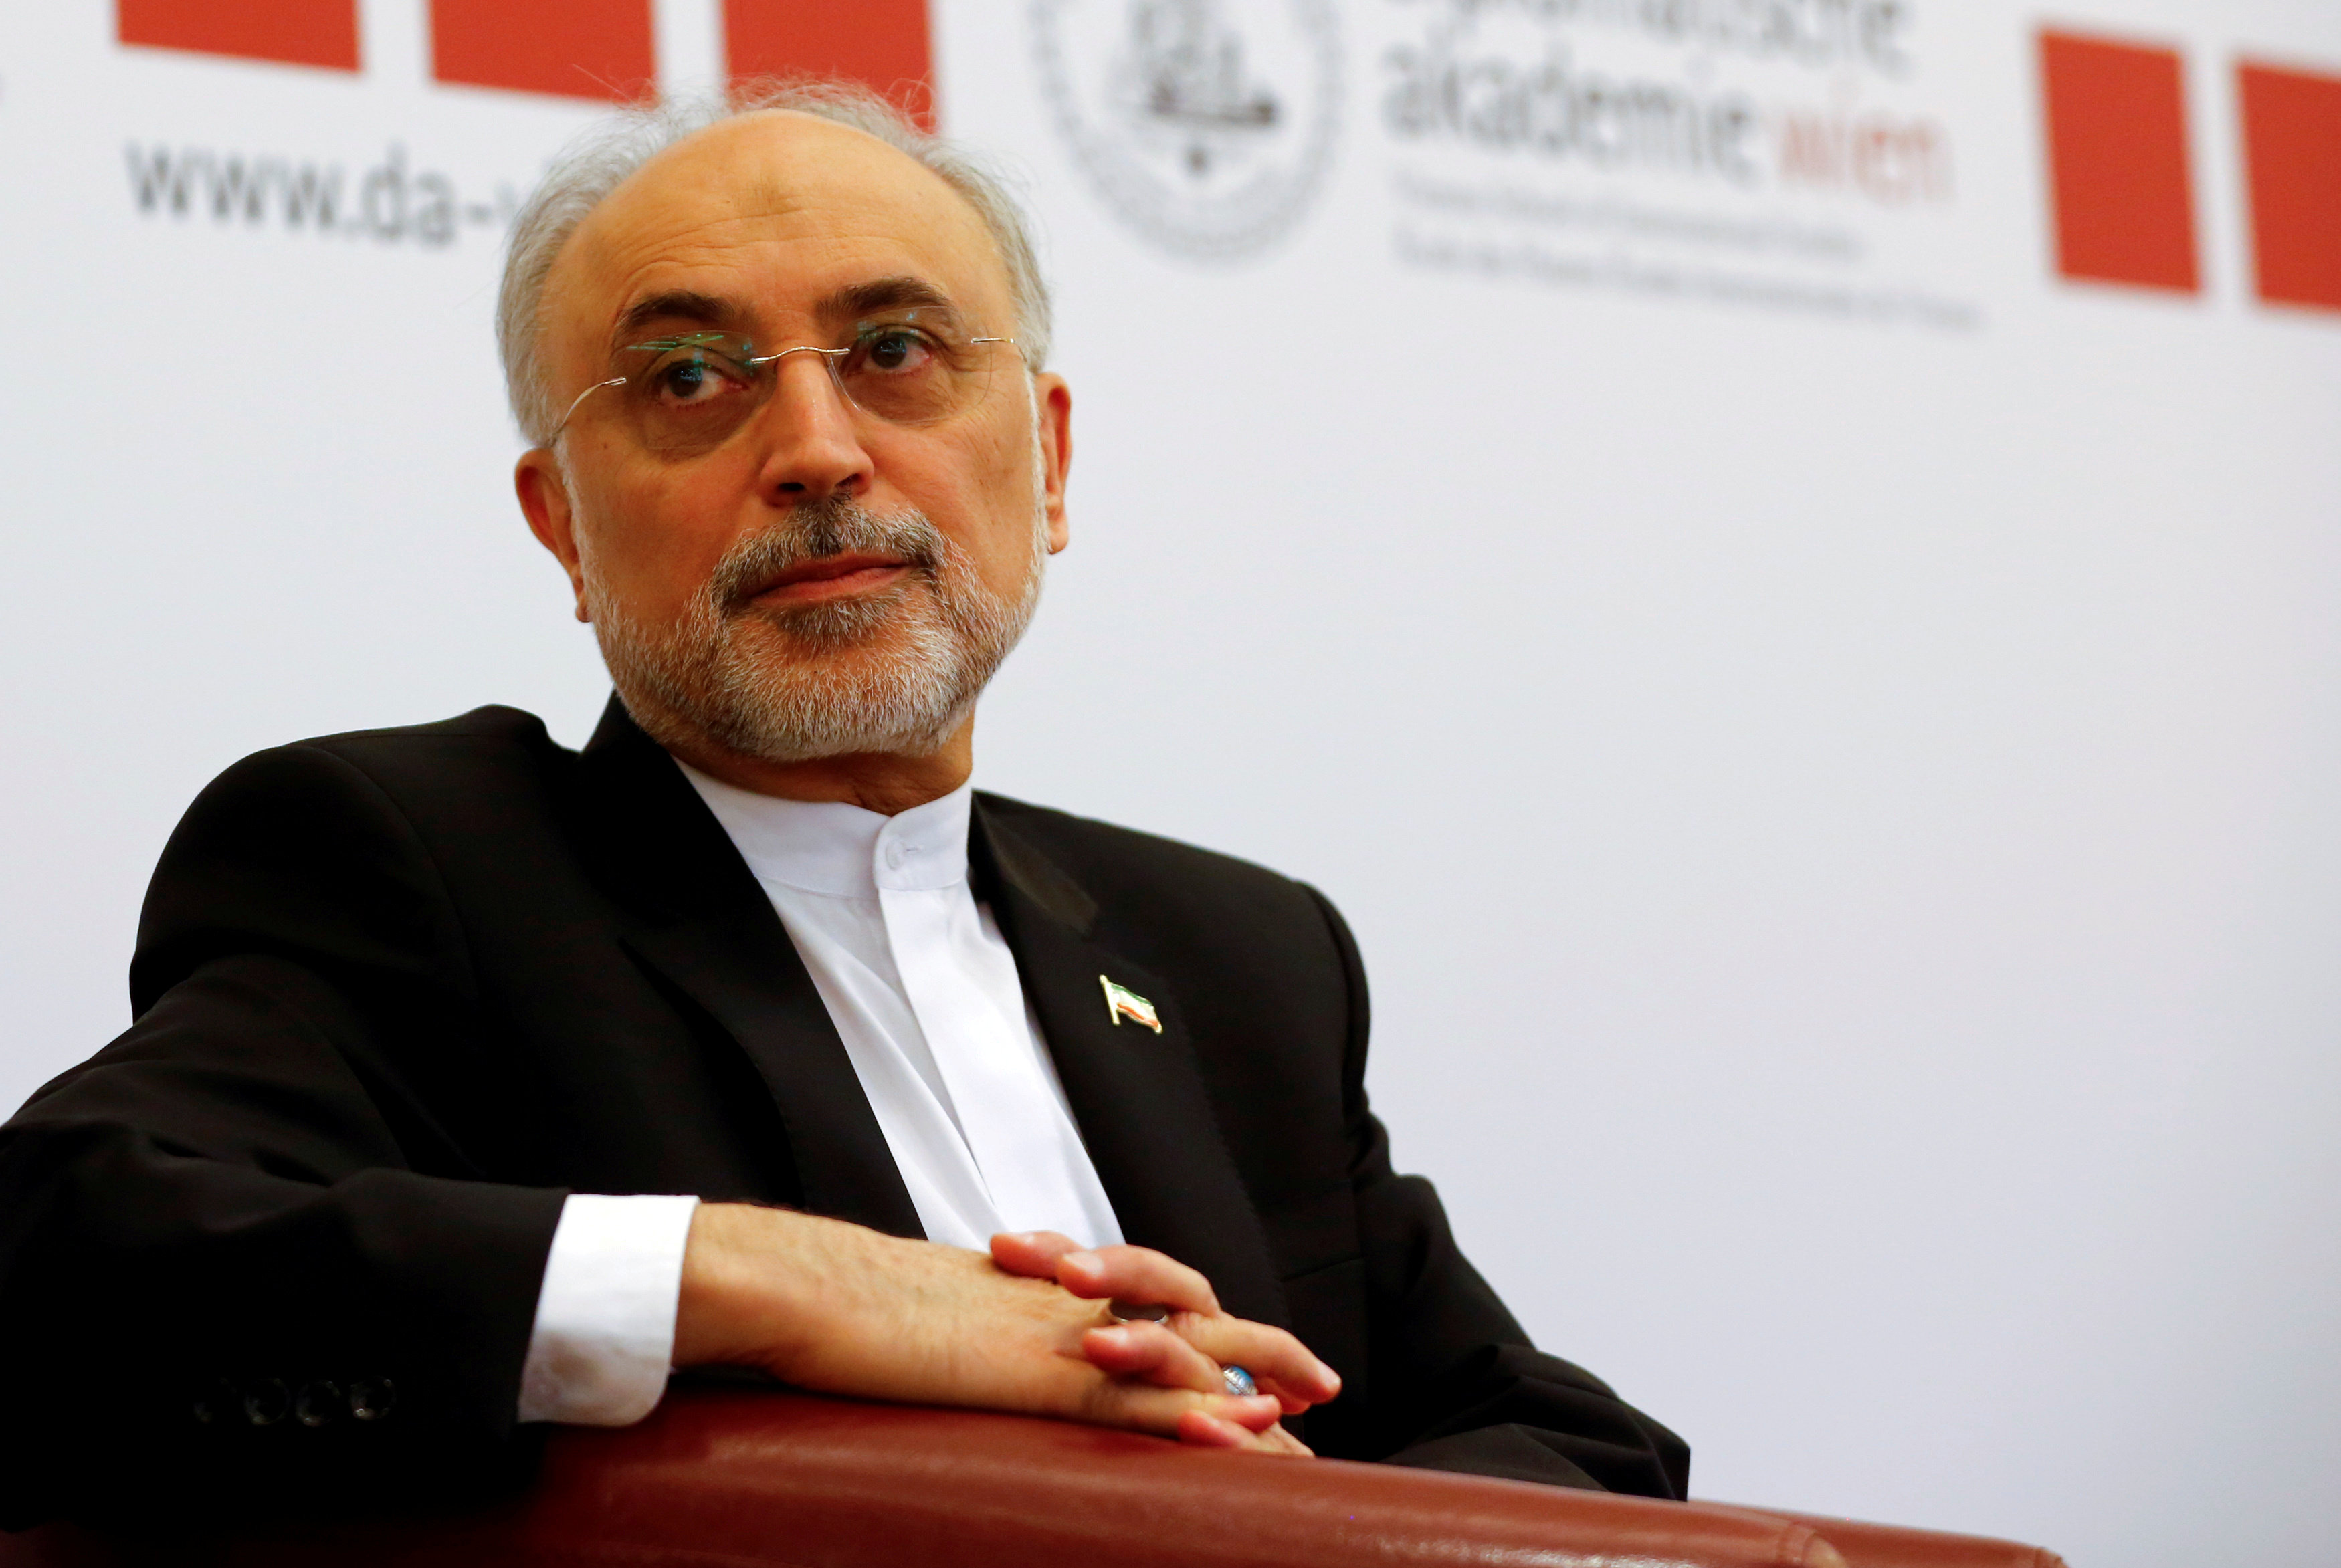 Iran may reconsider cooperation with UN nuclear watchdog